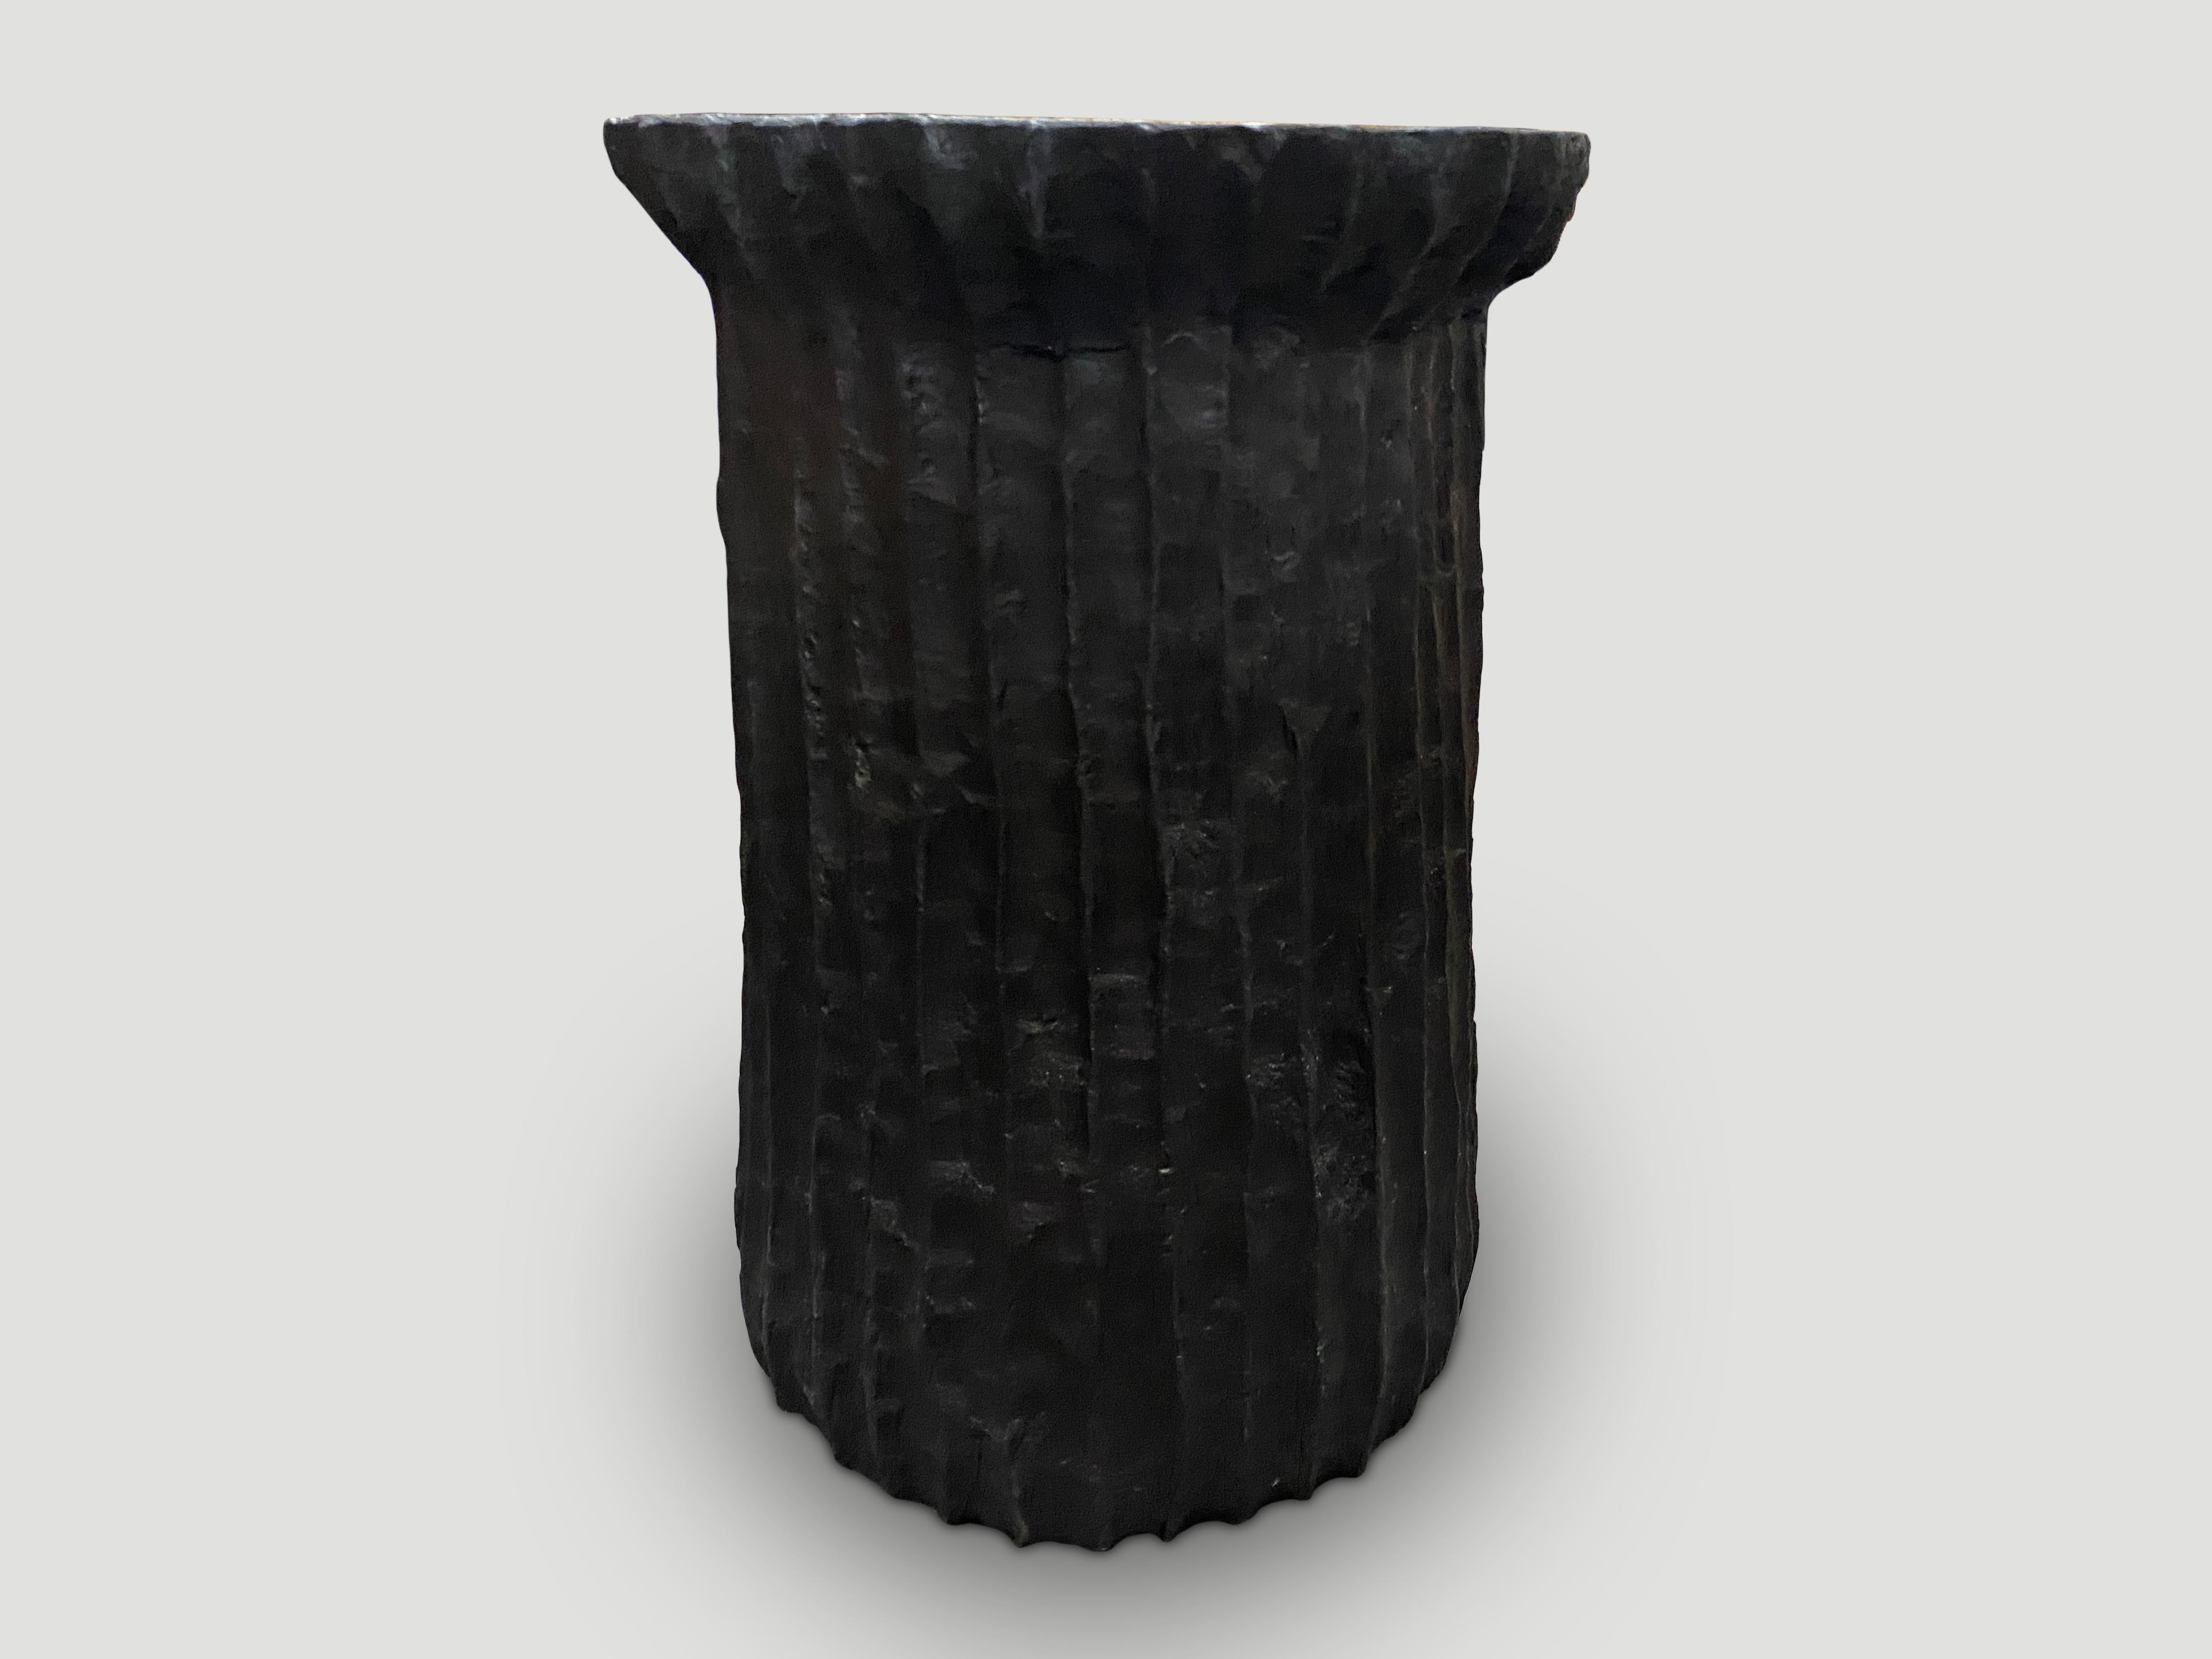 Beautiful hand carved minimalist charred teak wood side table or pedestal. We have a collection in different shapes and sizes. The price reflects the one shown. Also available bleached.

The Triple Burnt Collection represents a unique line of modern